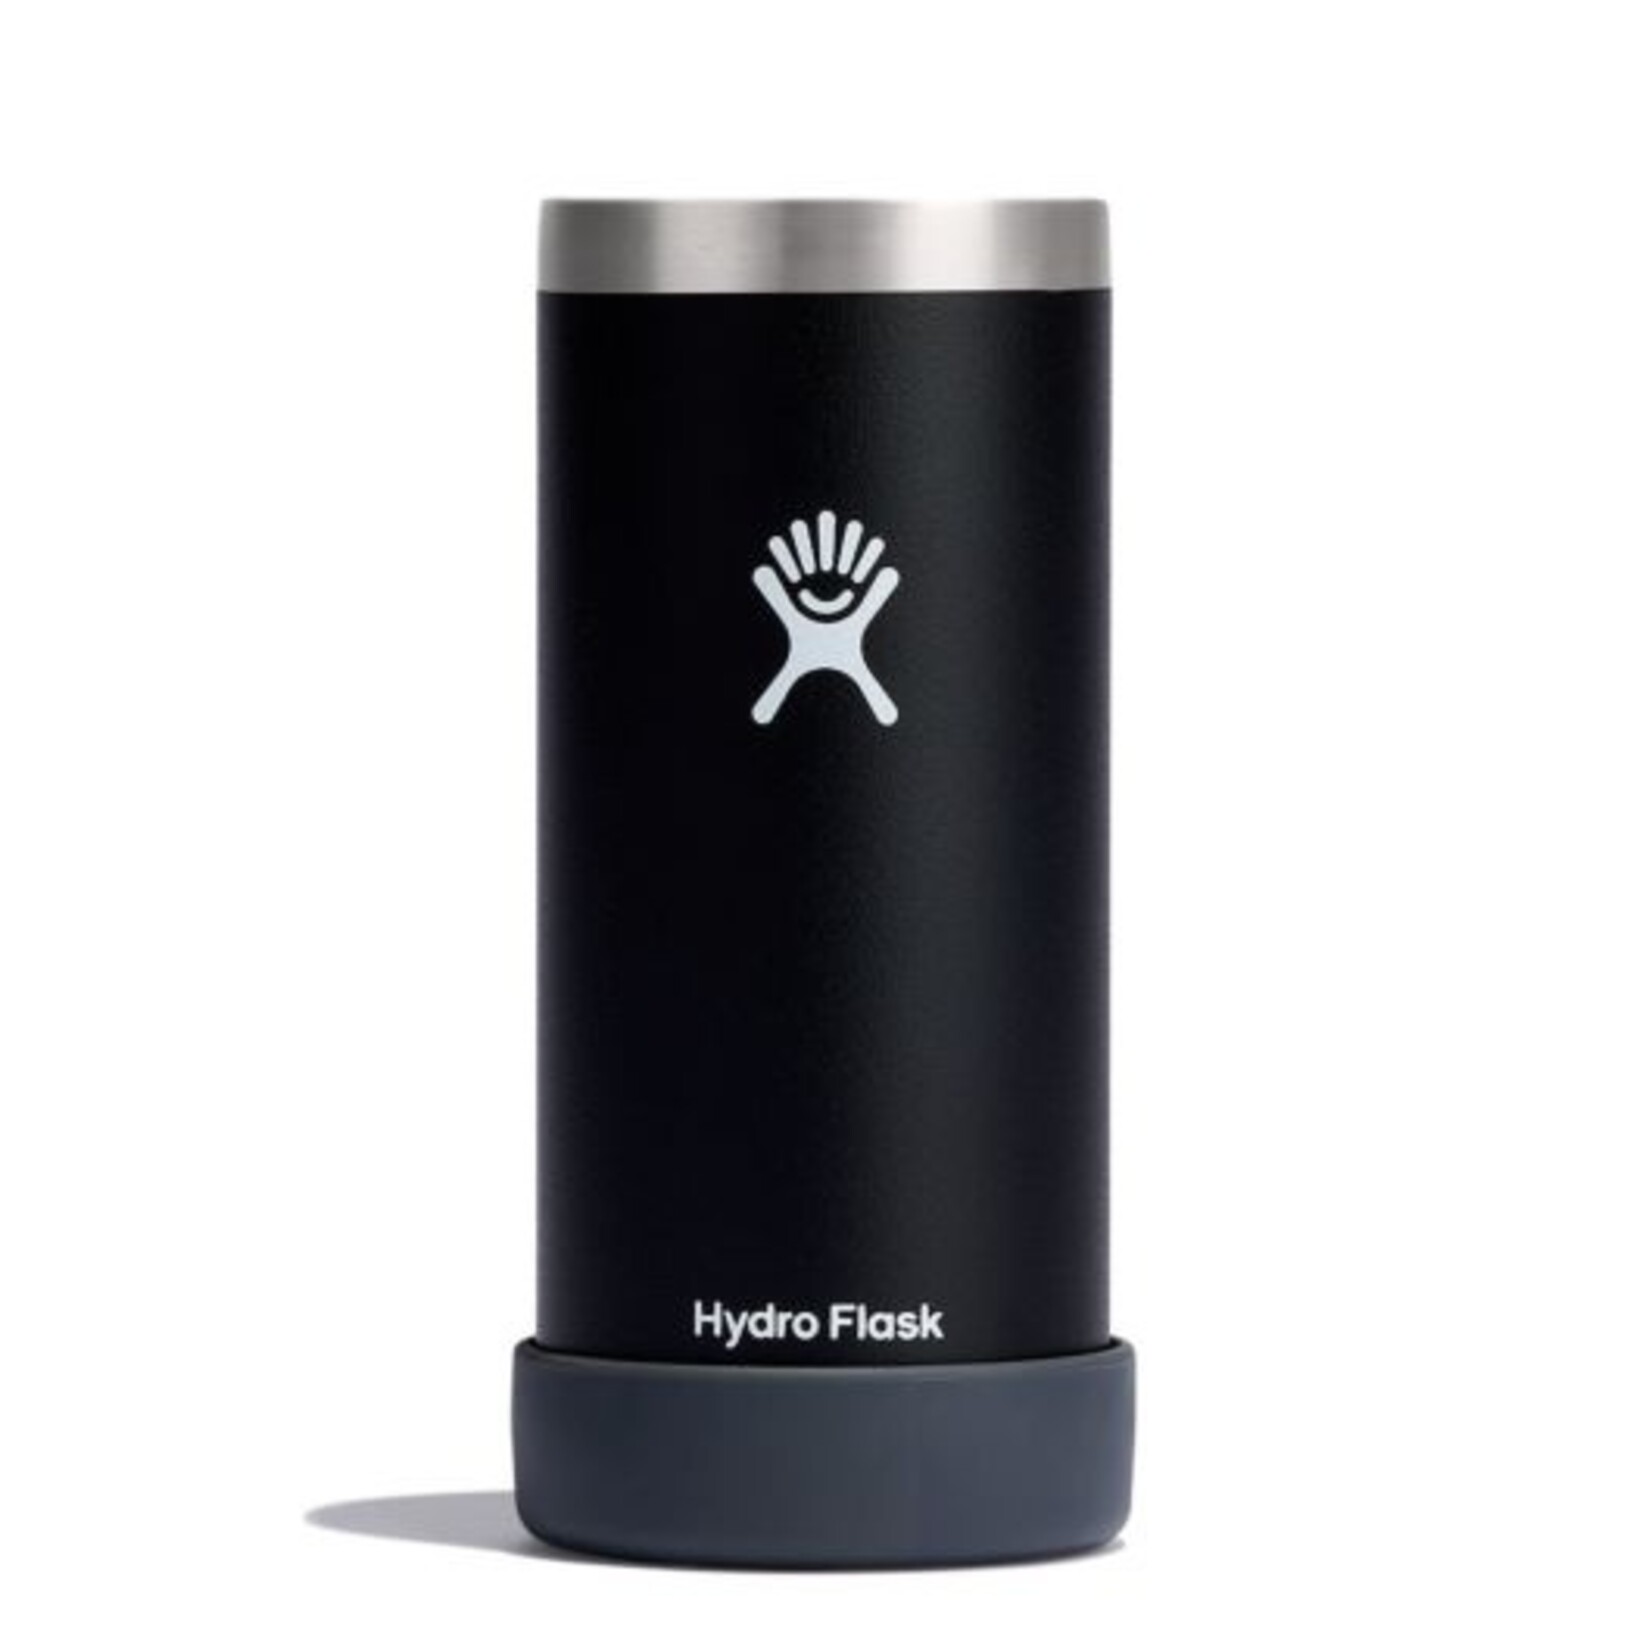 Hydro Flask 12oz slim cooler cup